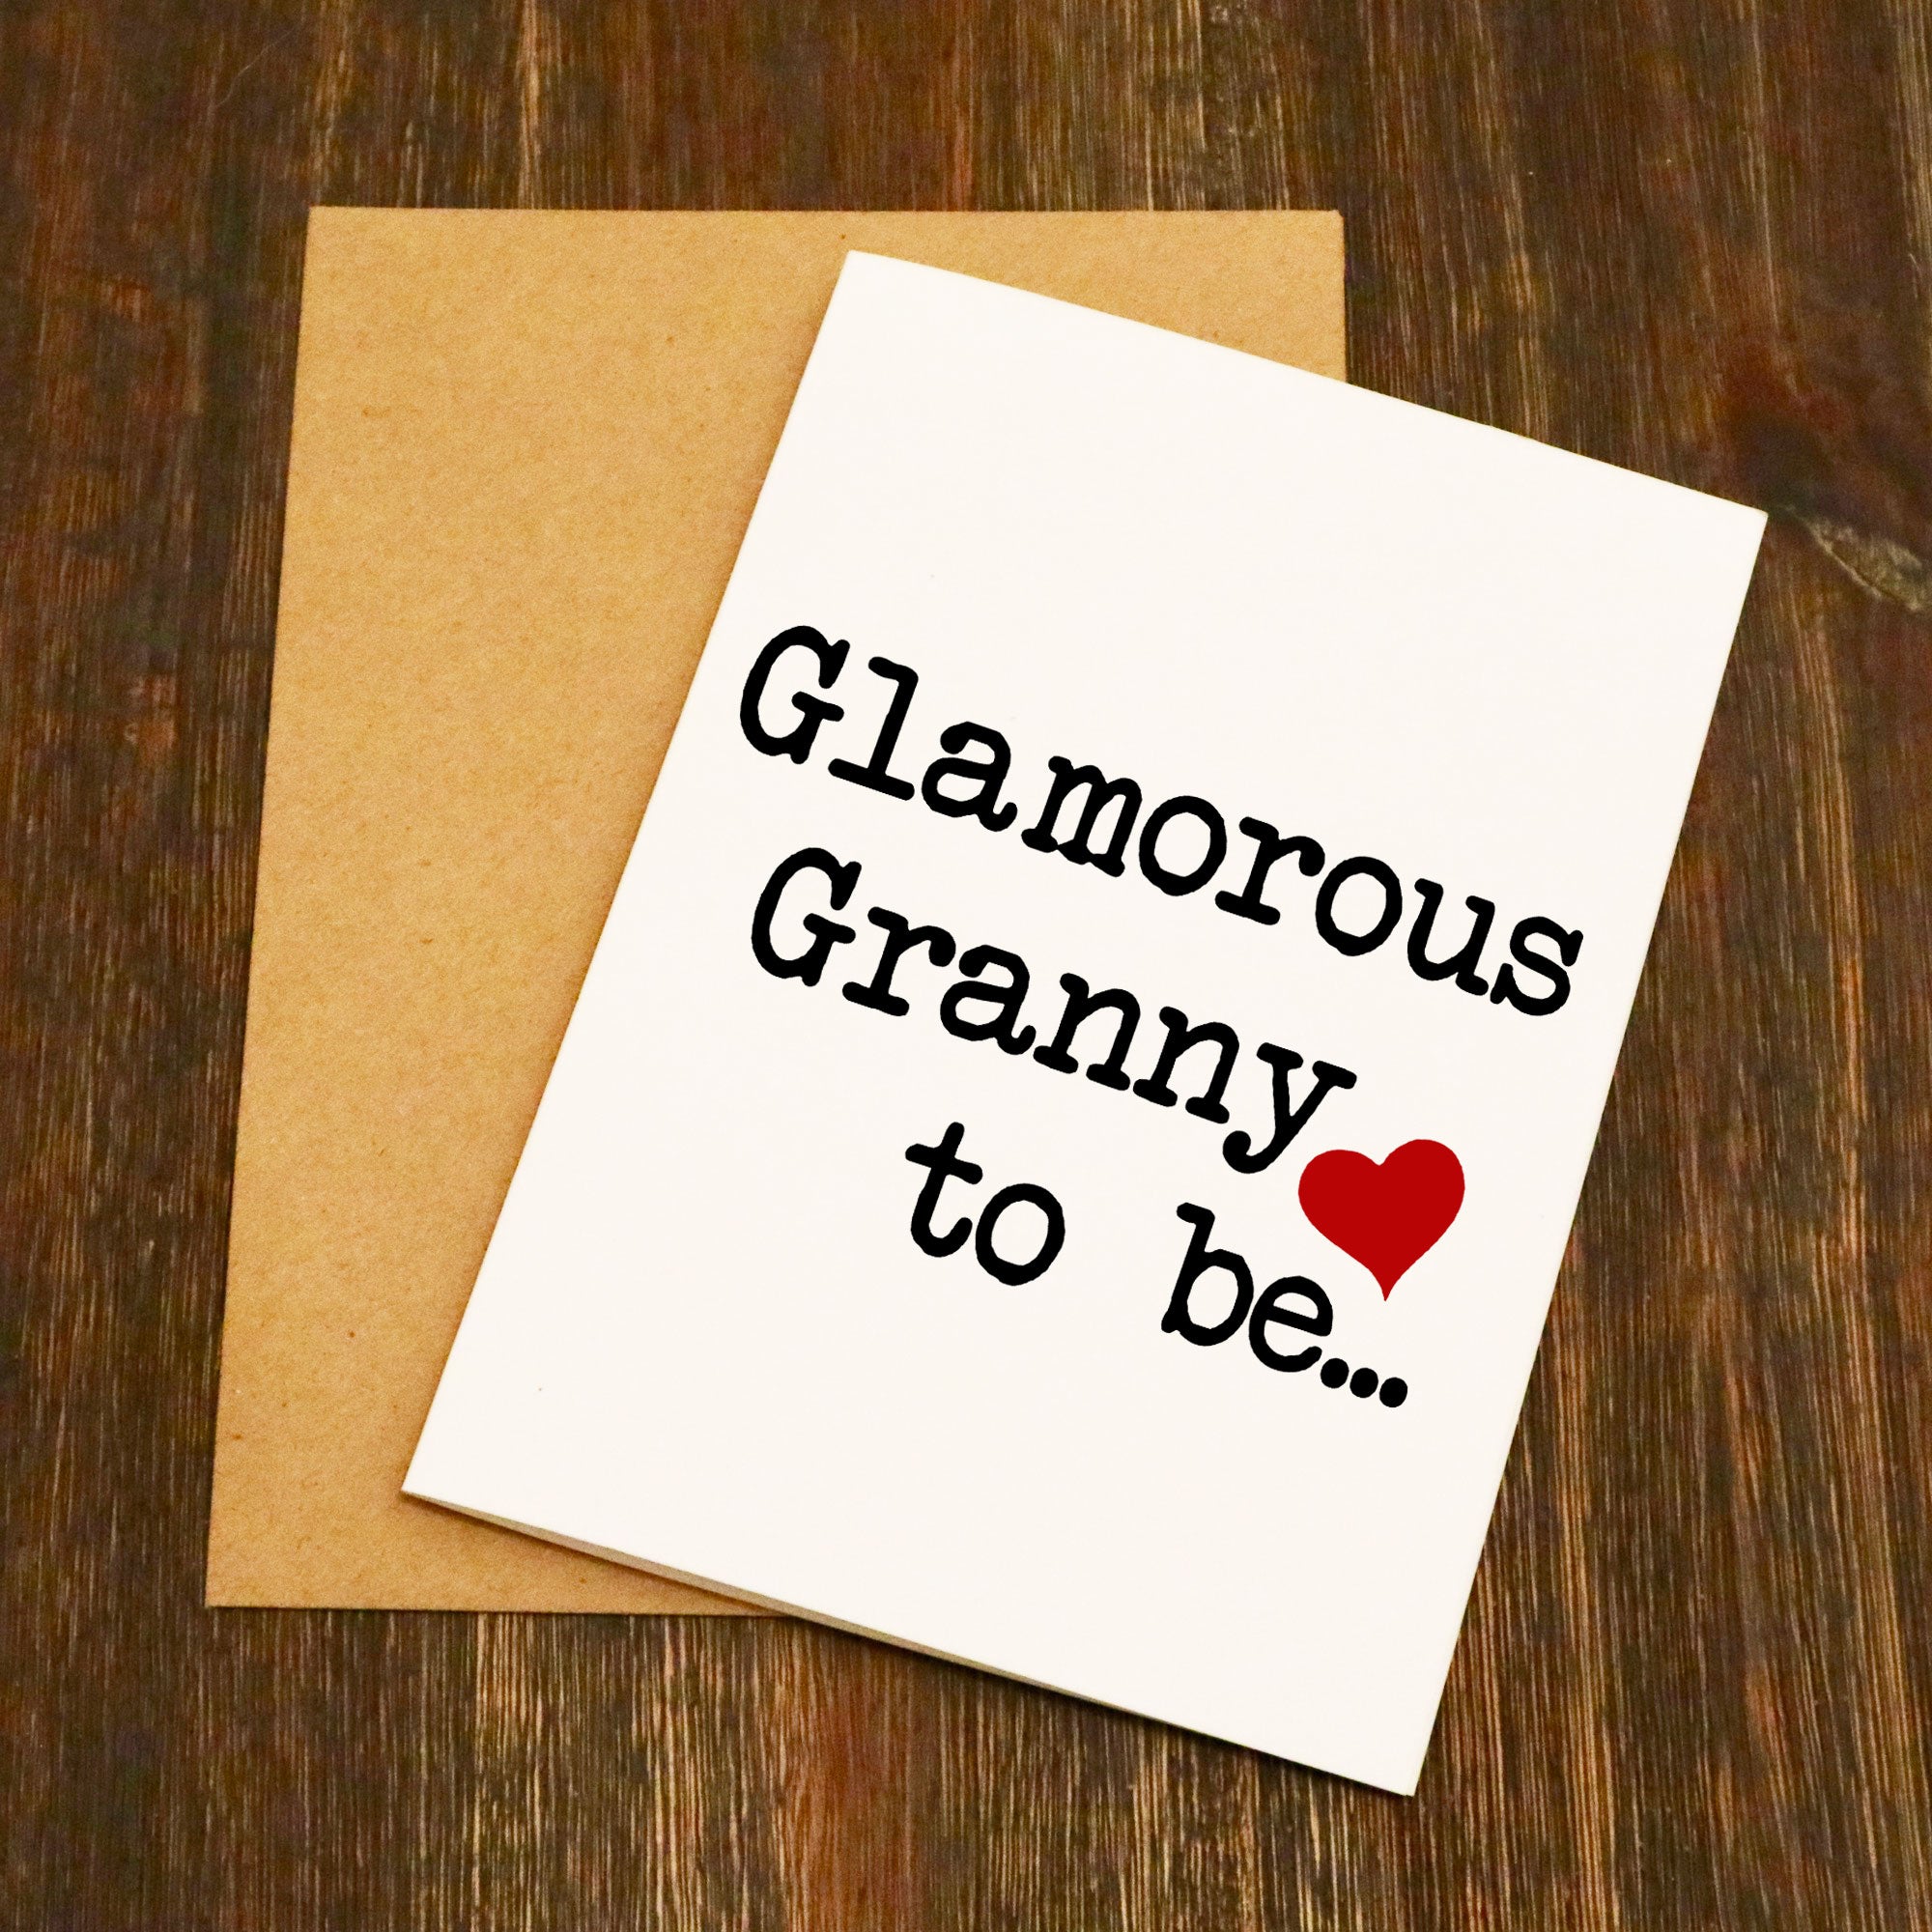 Glamorous Granny to be... Greetings Card